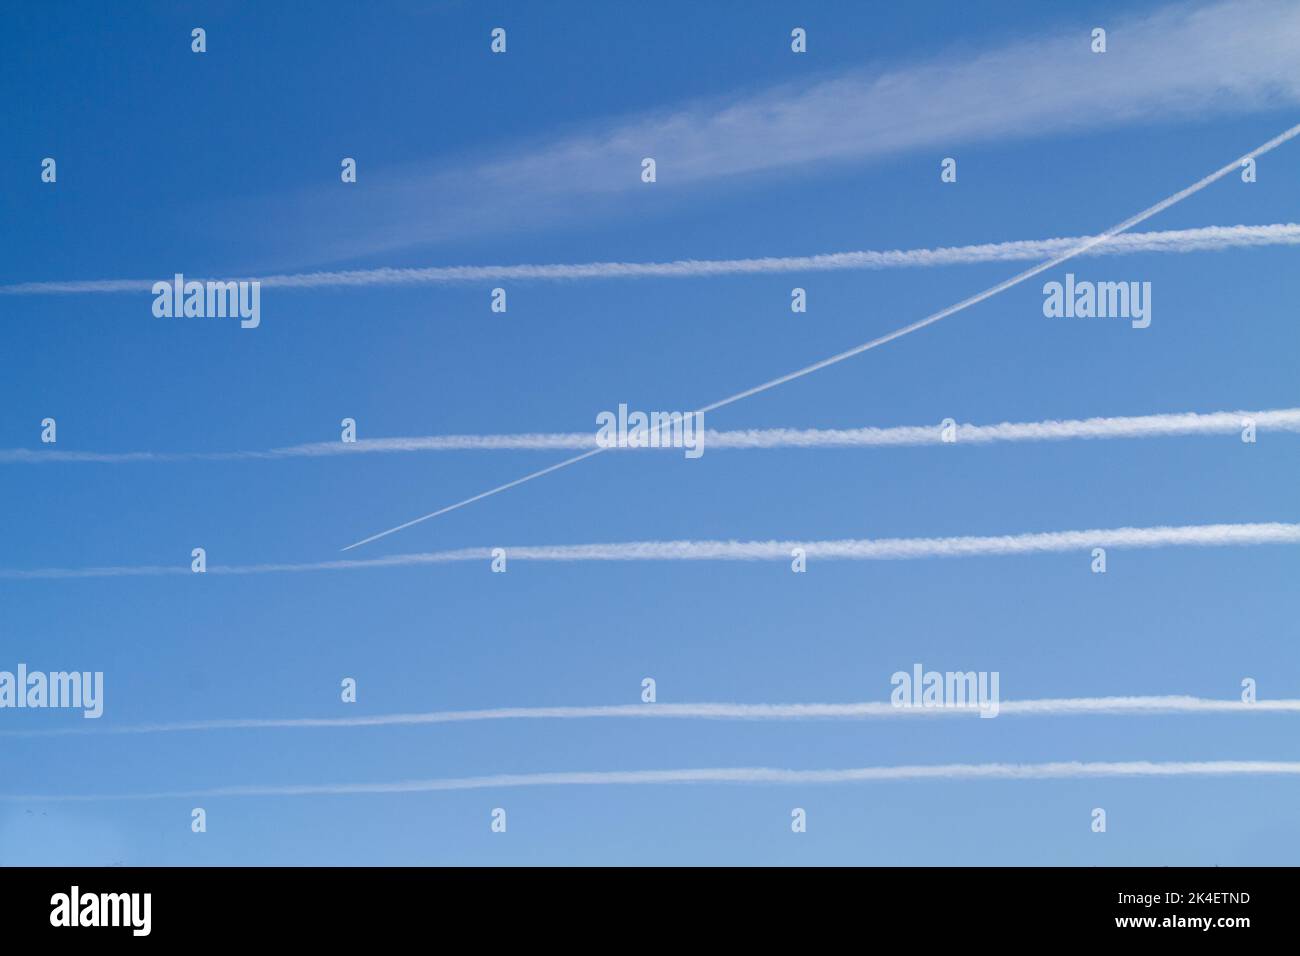 Six condensation trails, contrails or vapor trails in a blue sky, five parallel and horizontal and one crossing them Stock Photo